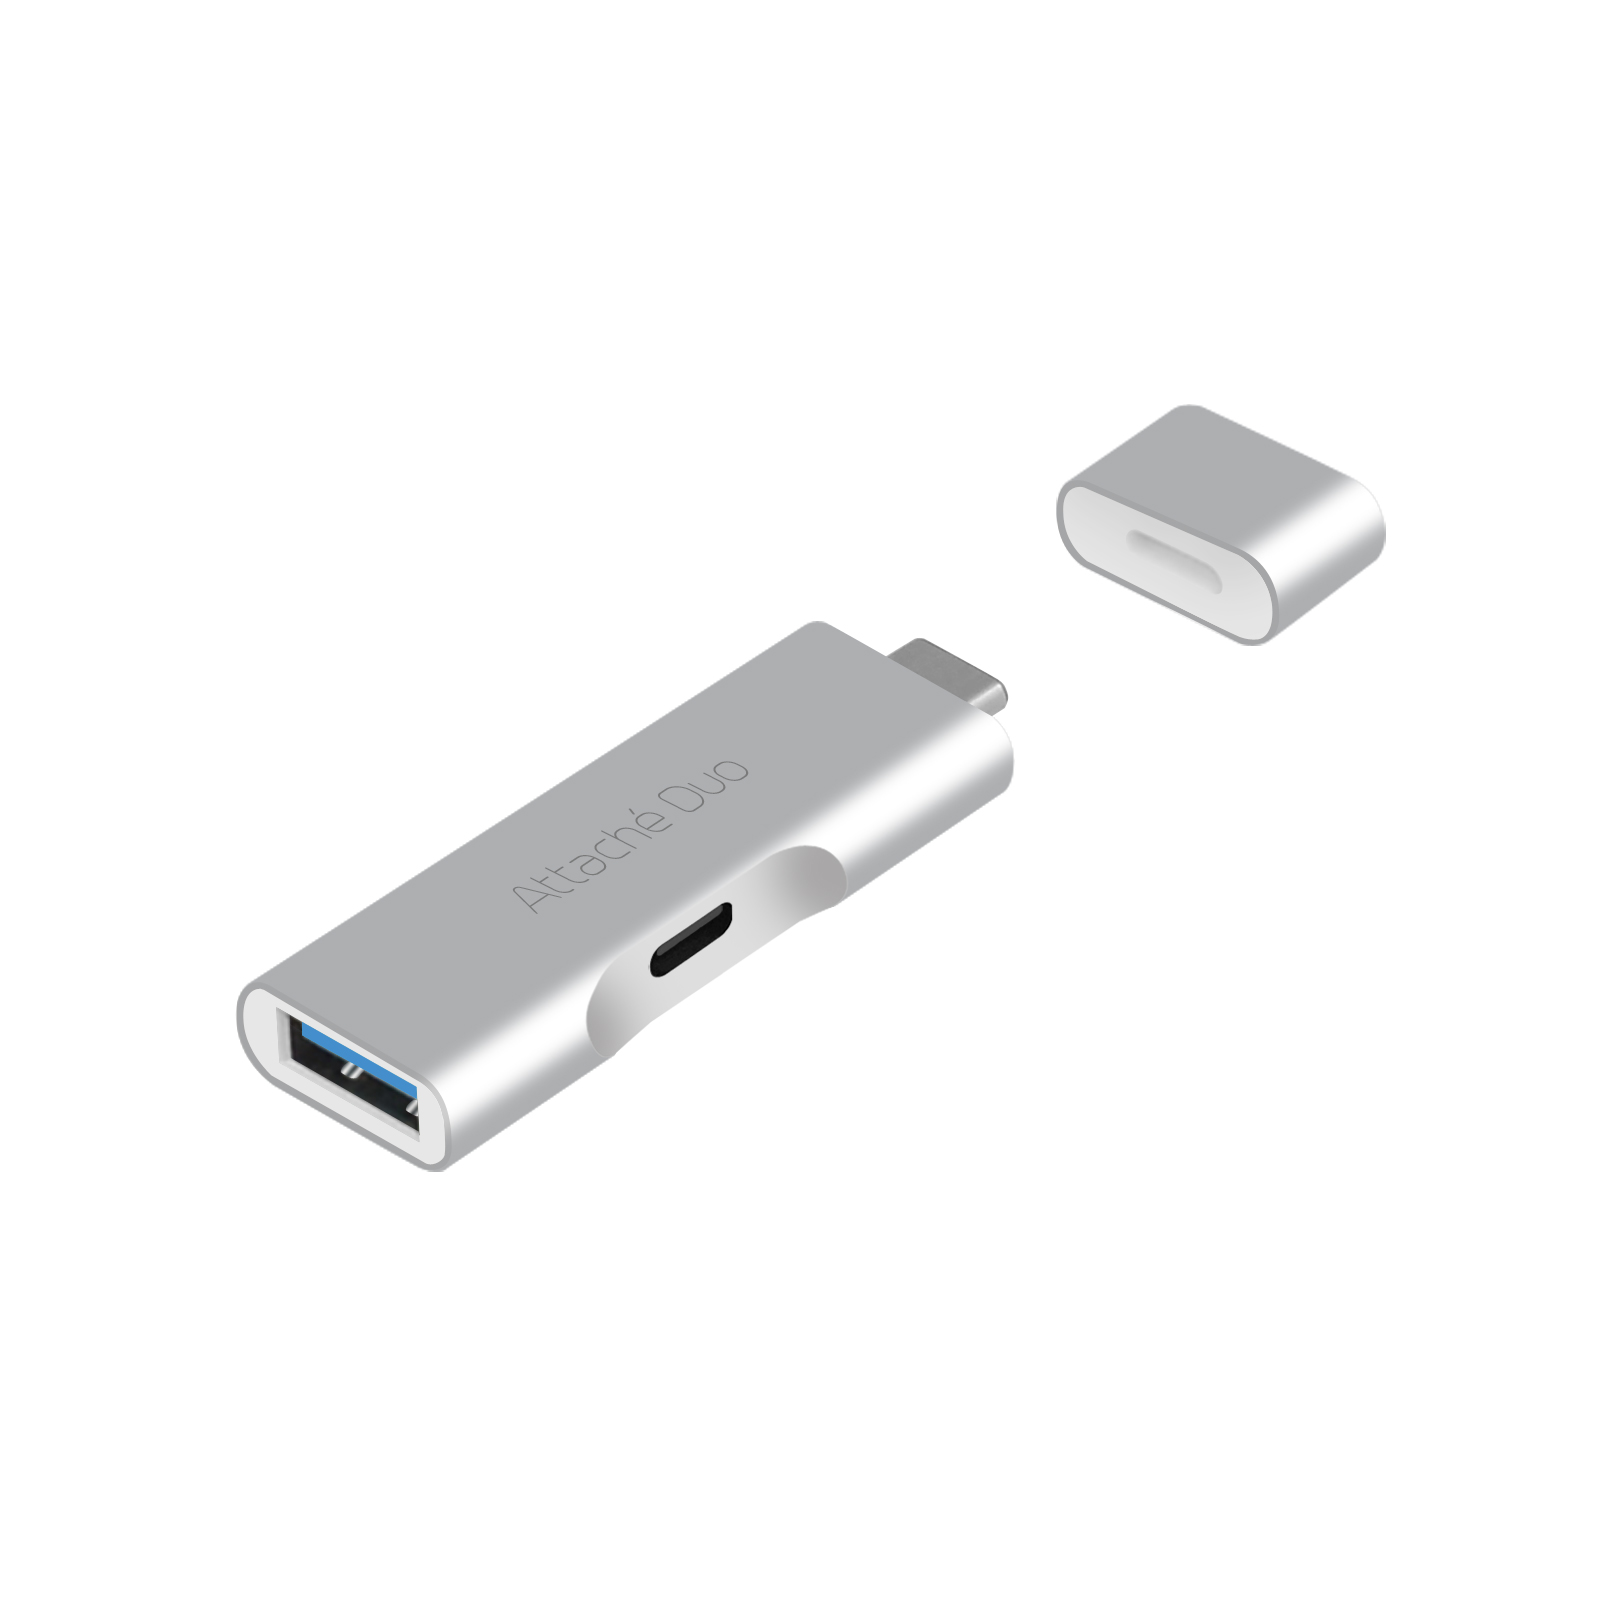 mbeat®  Attach Duo Type-C To USB 3.1 Adapter With Type-C Port - Support USB 3.1/3.0/2.0/1.1 devices